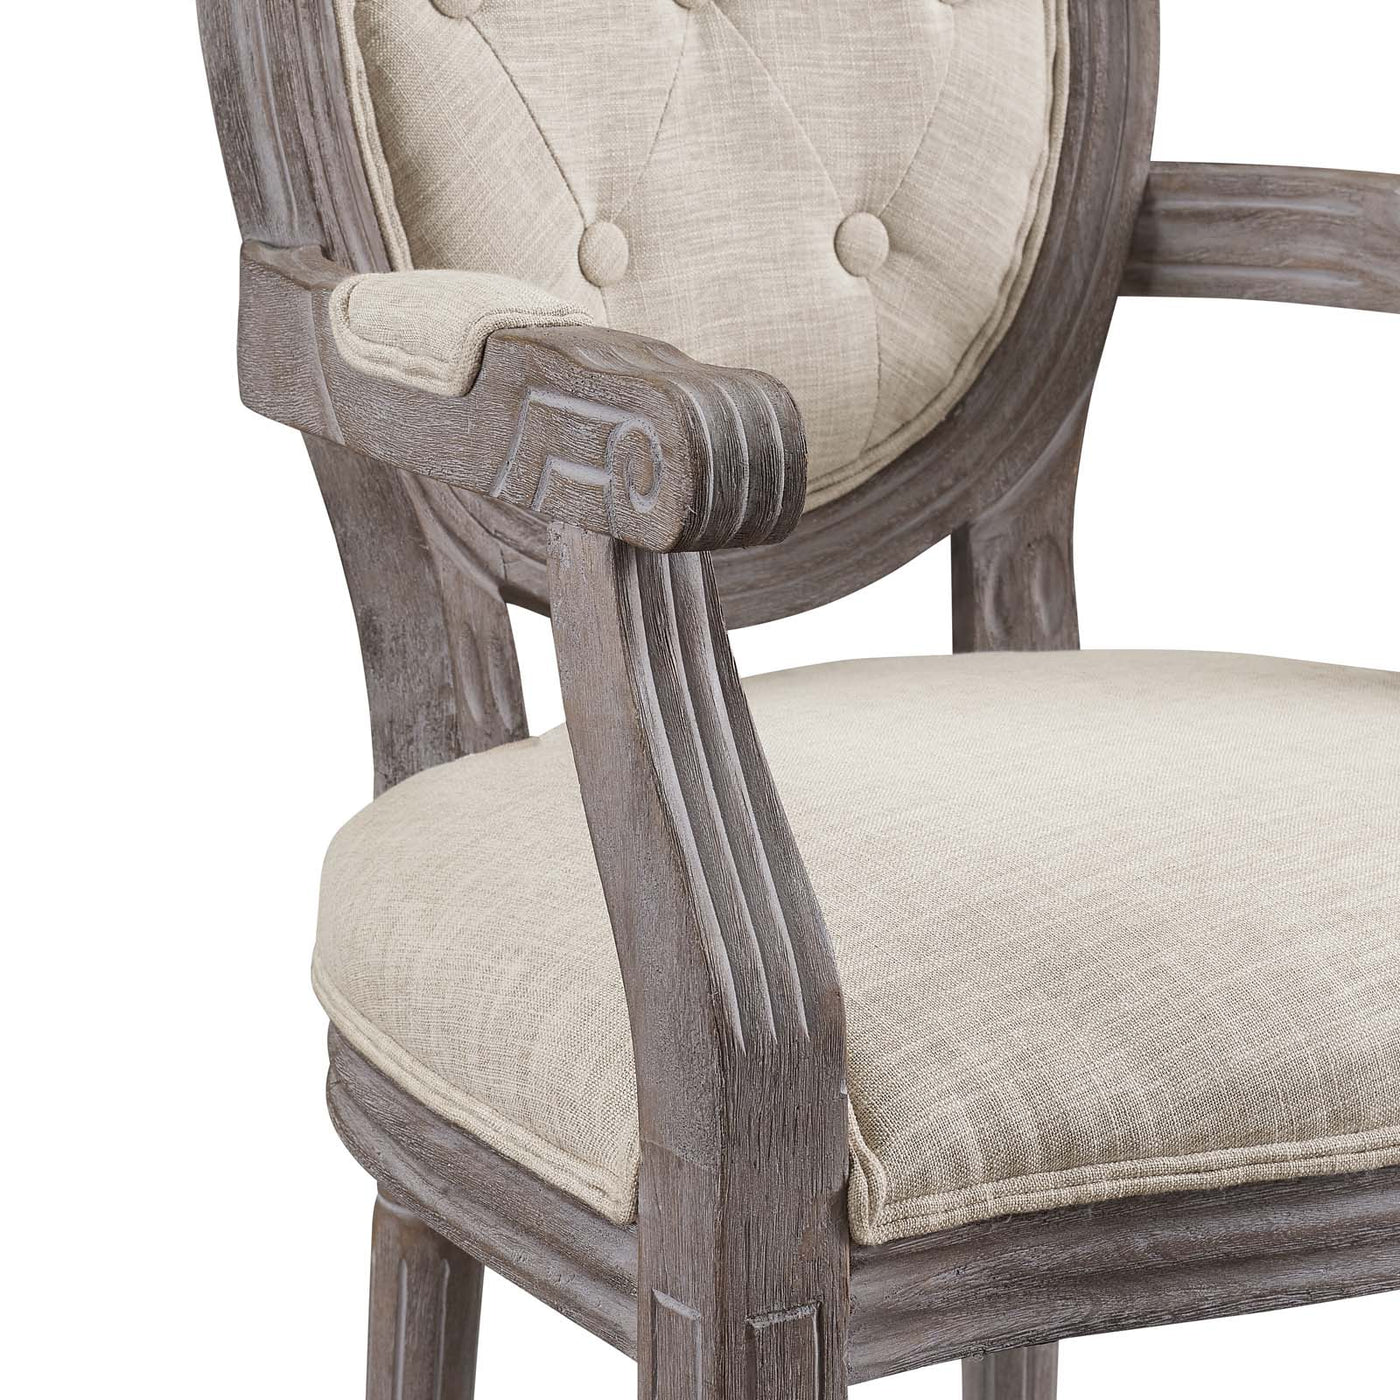 Arise Vintage French Dining Armchair